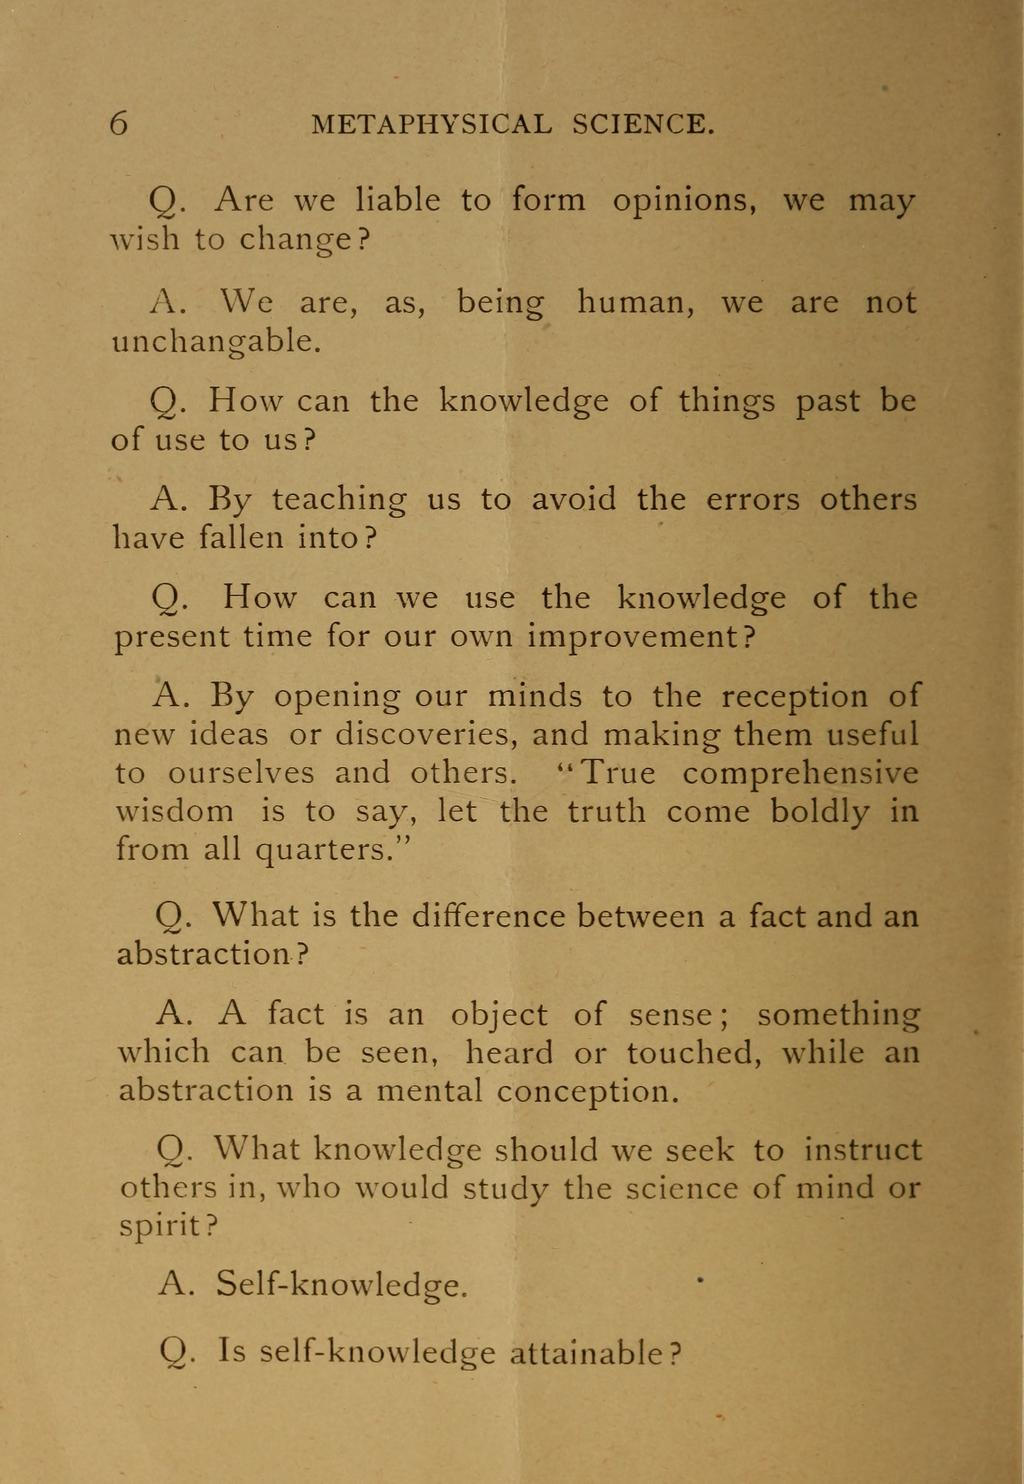 6 METAPHYSICAL SCIENCE. Q. Are we liable to form opinions, we may wish to change? A. We are, as, being human, we are not unchangable. 0. How can the knowledge of things past be of use to us? A. By teaching us to avoid the errors others have fallen into?